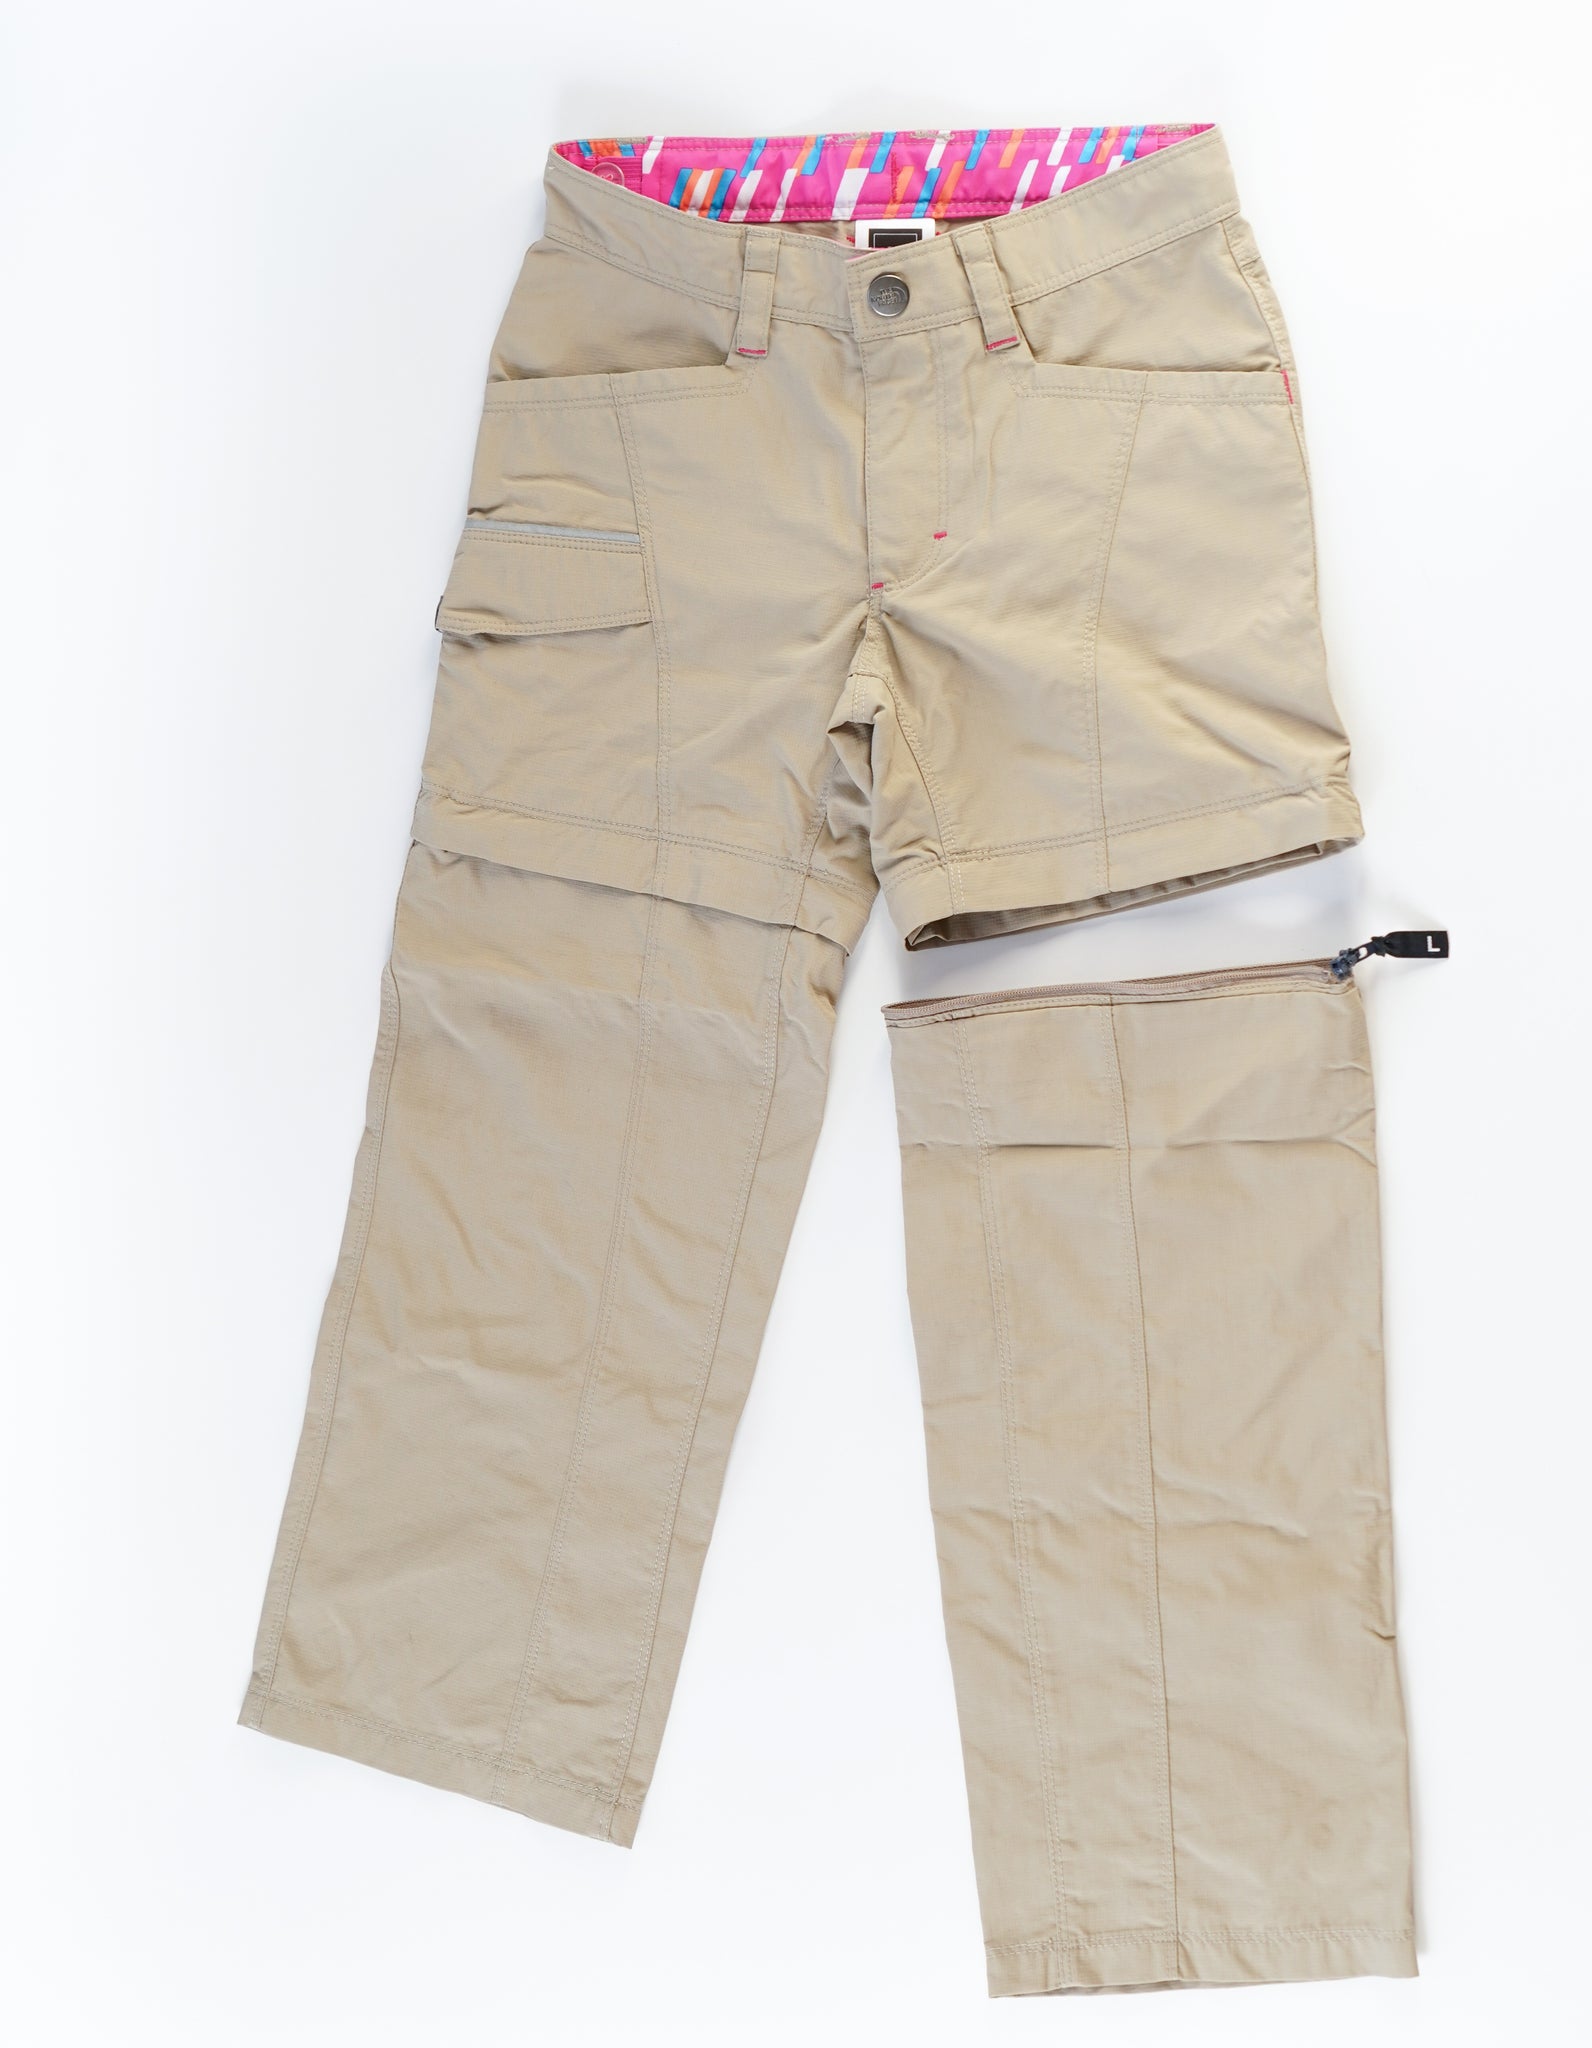 GIRL SIZE XS (6 YEARS) - NORTH FACE, CONVERTIBLE Hiking Pants/Shorts N –  Faith and Love Thrift